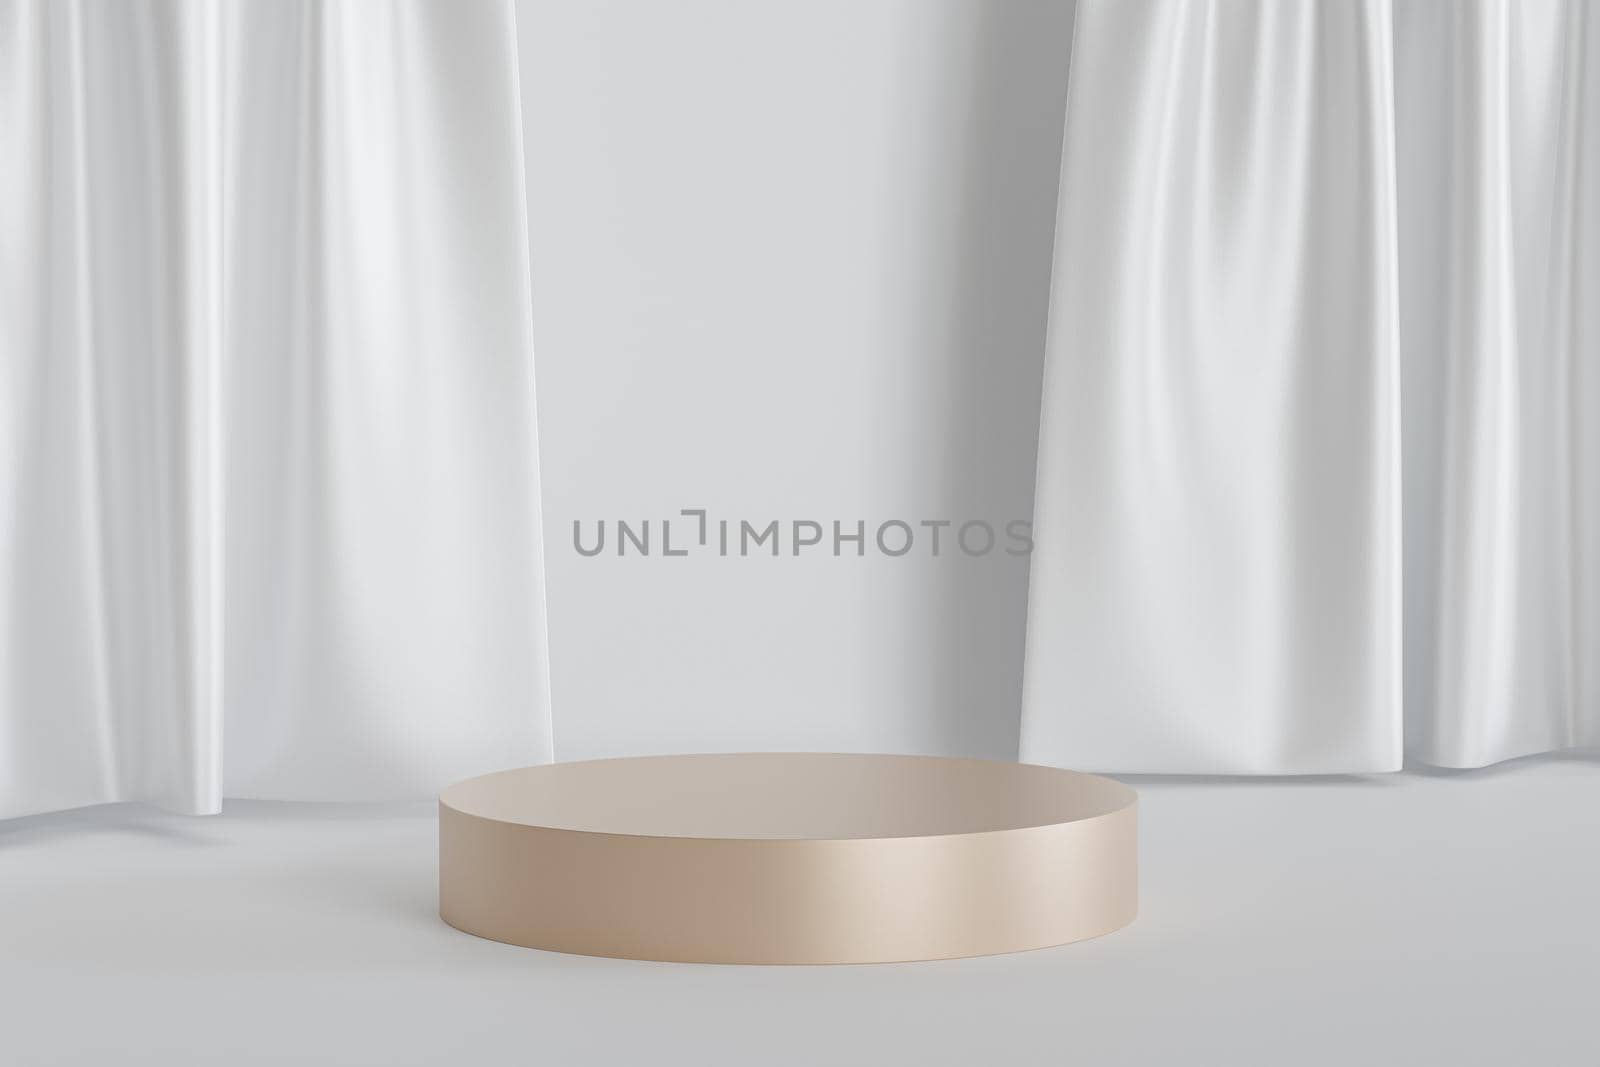 Cylinder shaped podium or pedestal for products or advertising on shiny white curtains background, minimal 3d illustration render by Frostroomhead